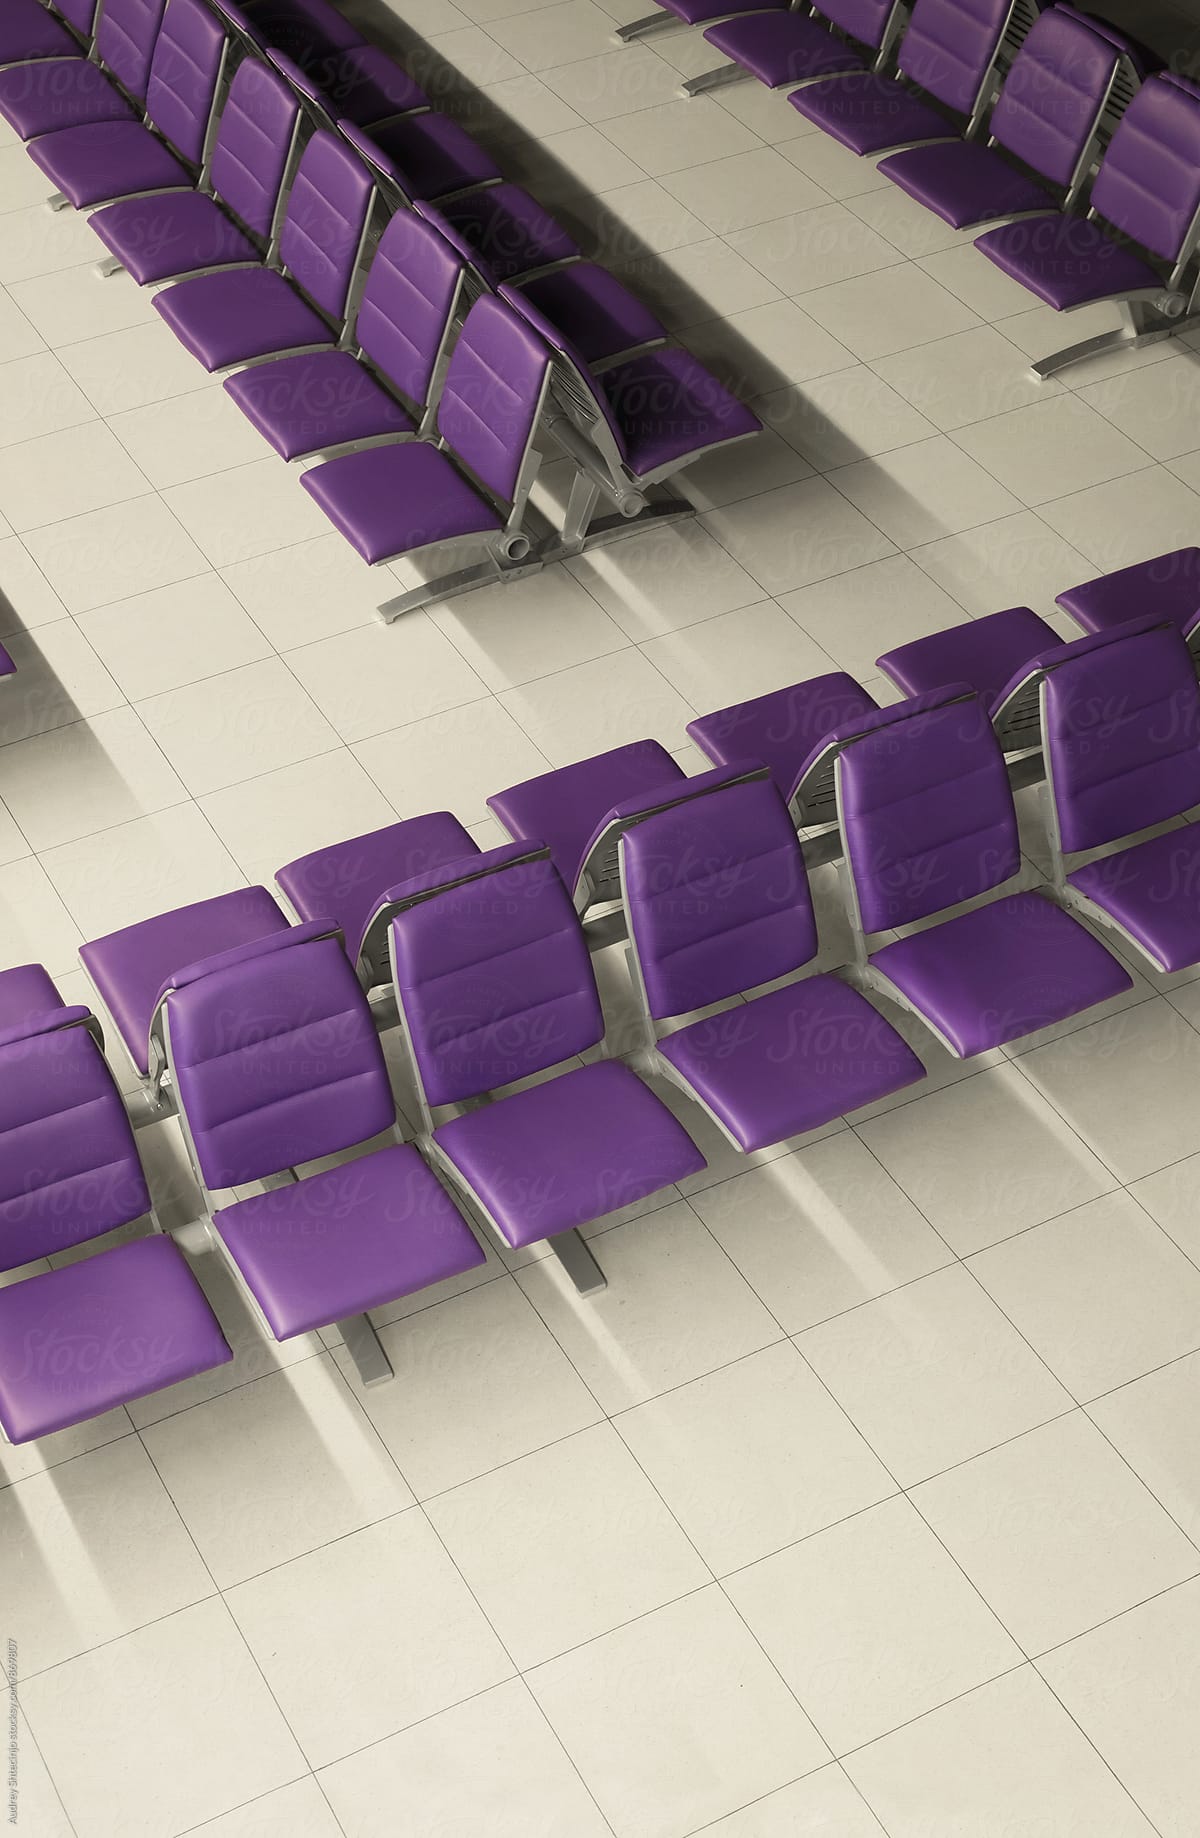 Purple chairs in airport waiting space